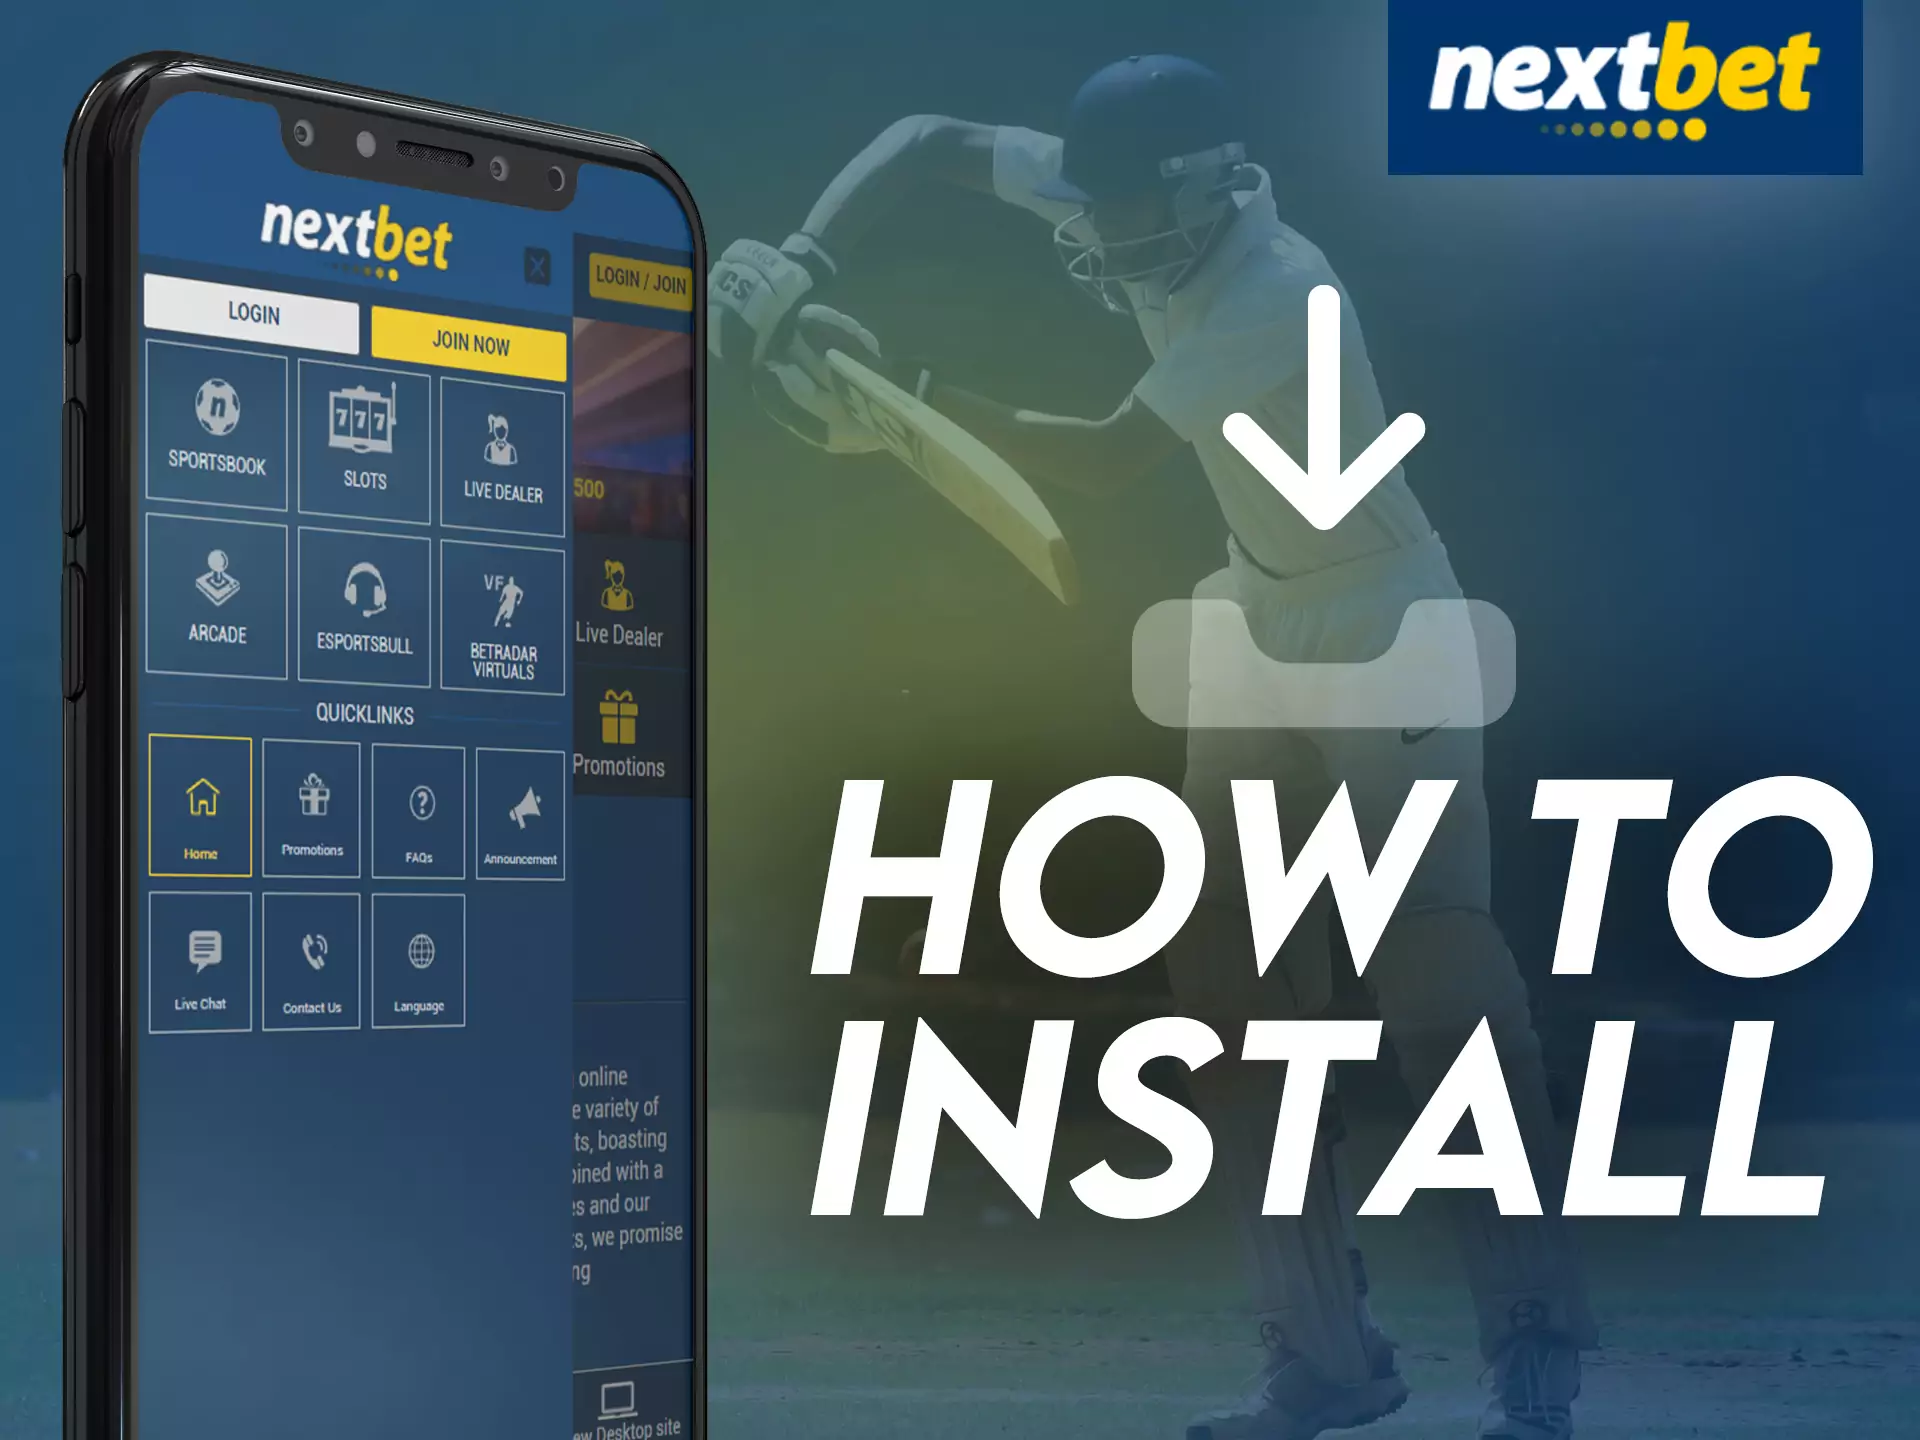 With this instruction, learn how to quickly and easily install the Nextbet application.